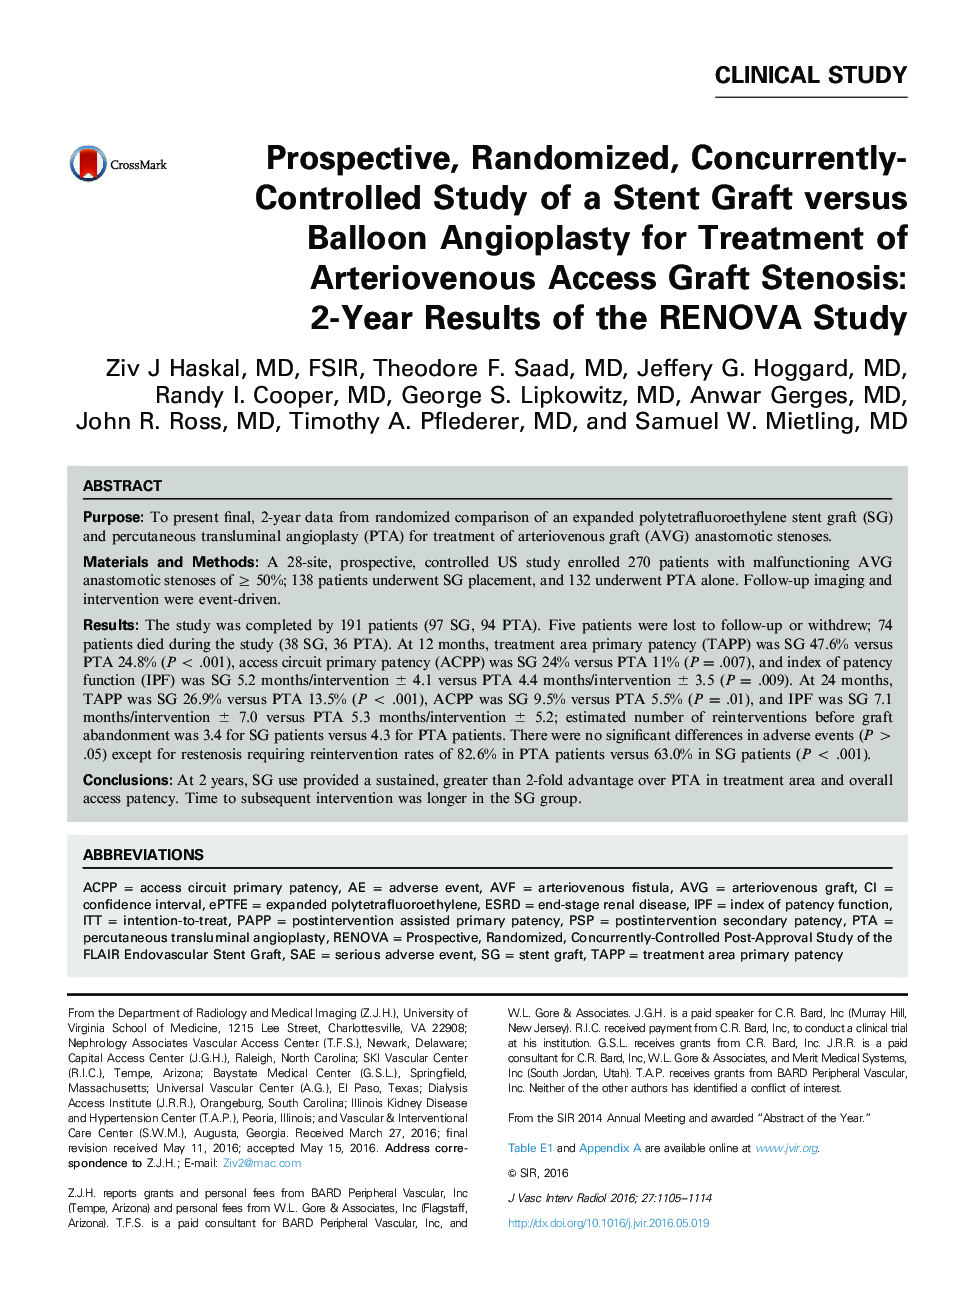 Prospective, Randomized, Concurrently-Controlled Study of a Stent Graft versus Balloon Angioplasty for Treatment of Arteriovenous Access Graft Stenosis: 2-Year Results of the RENOVA Study